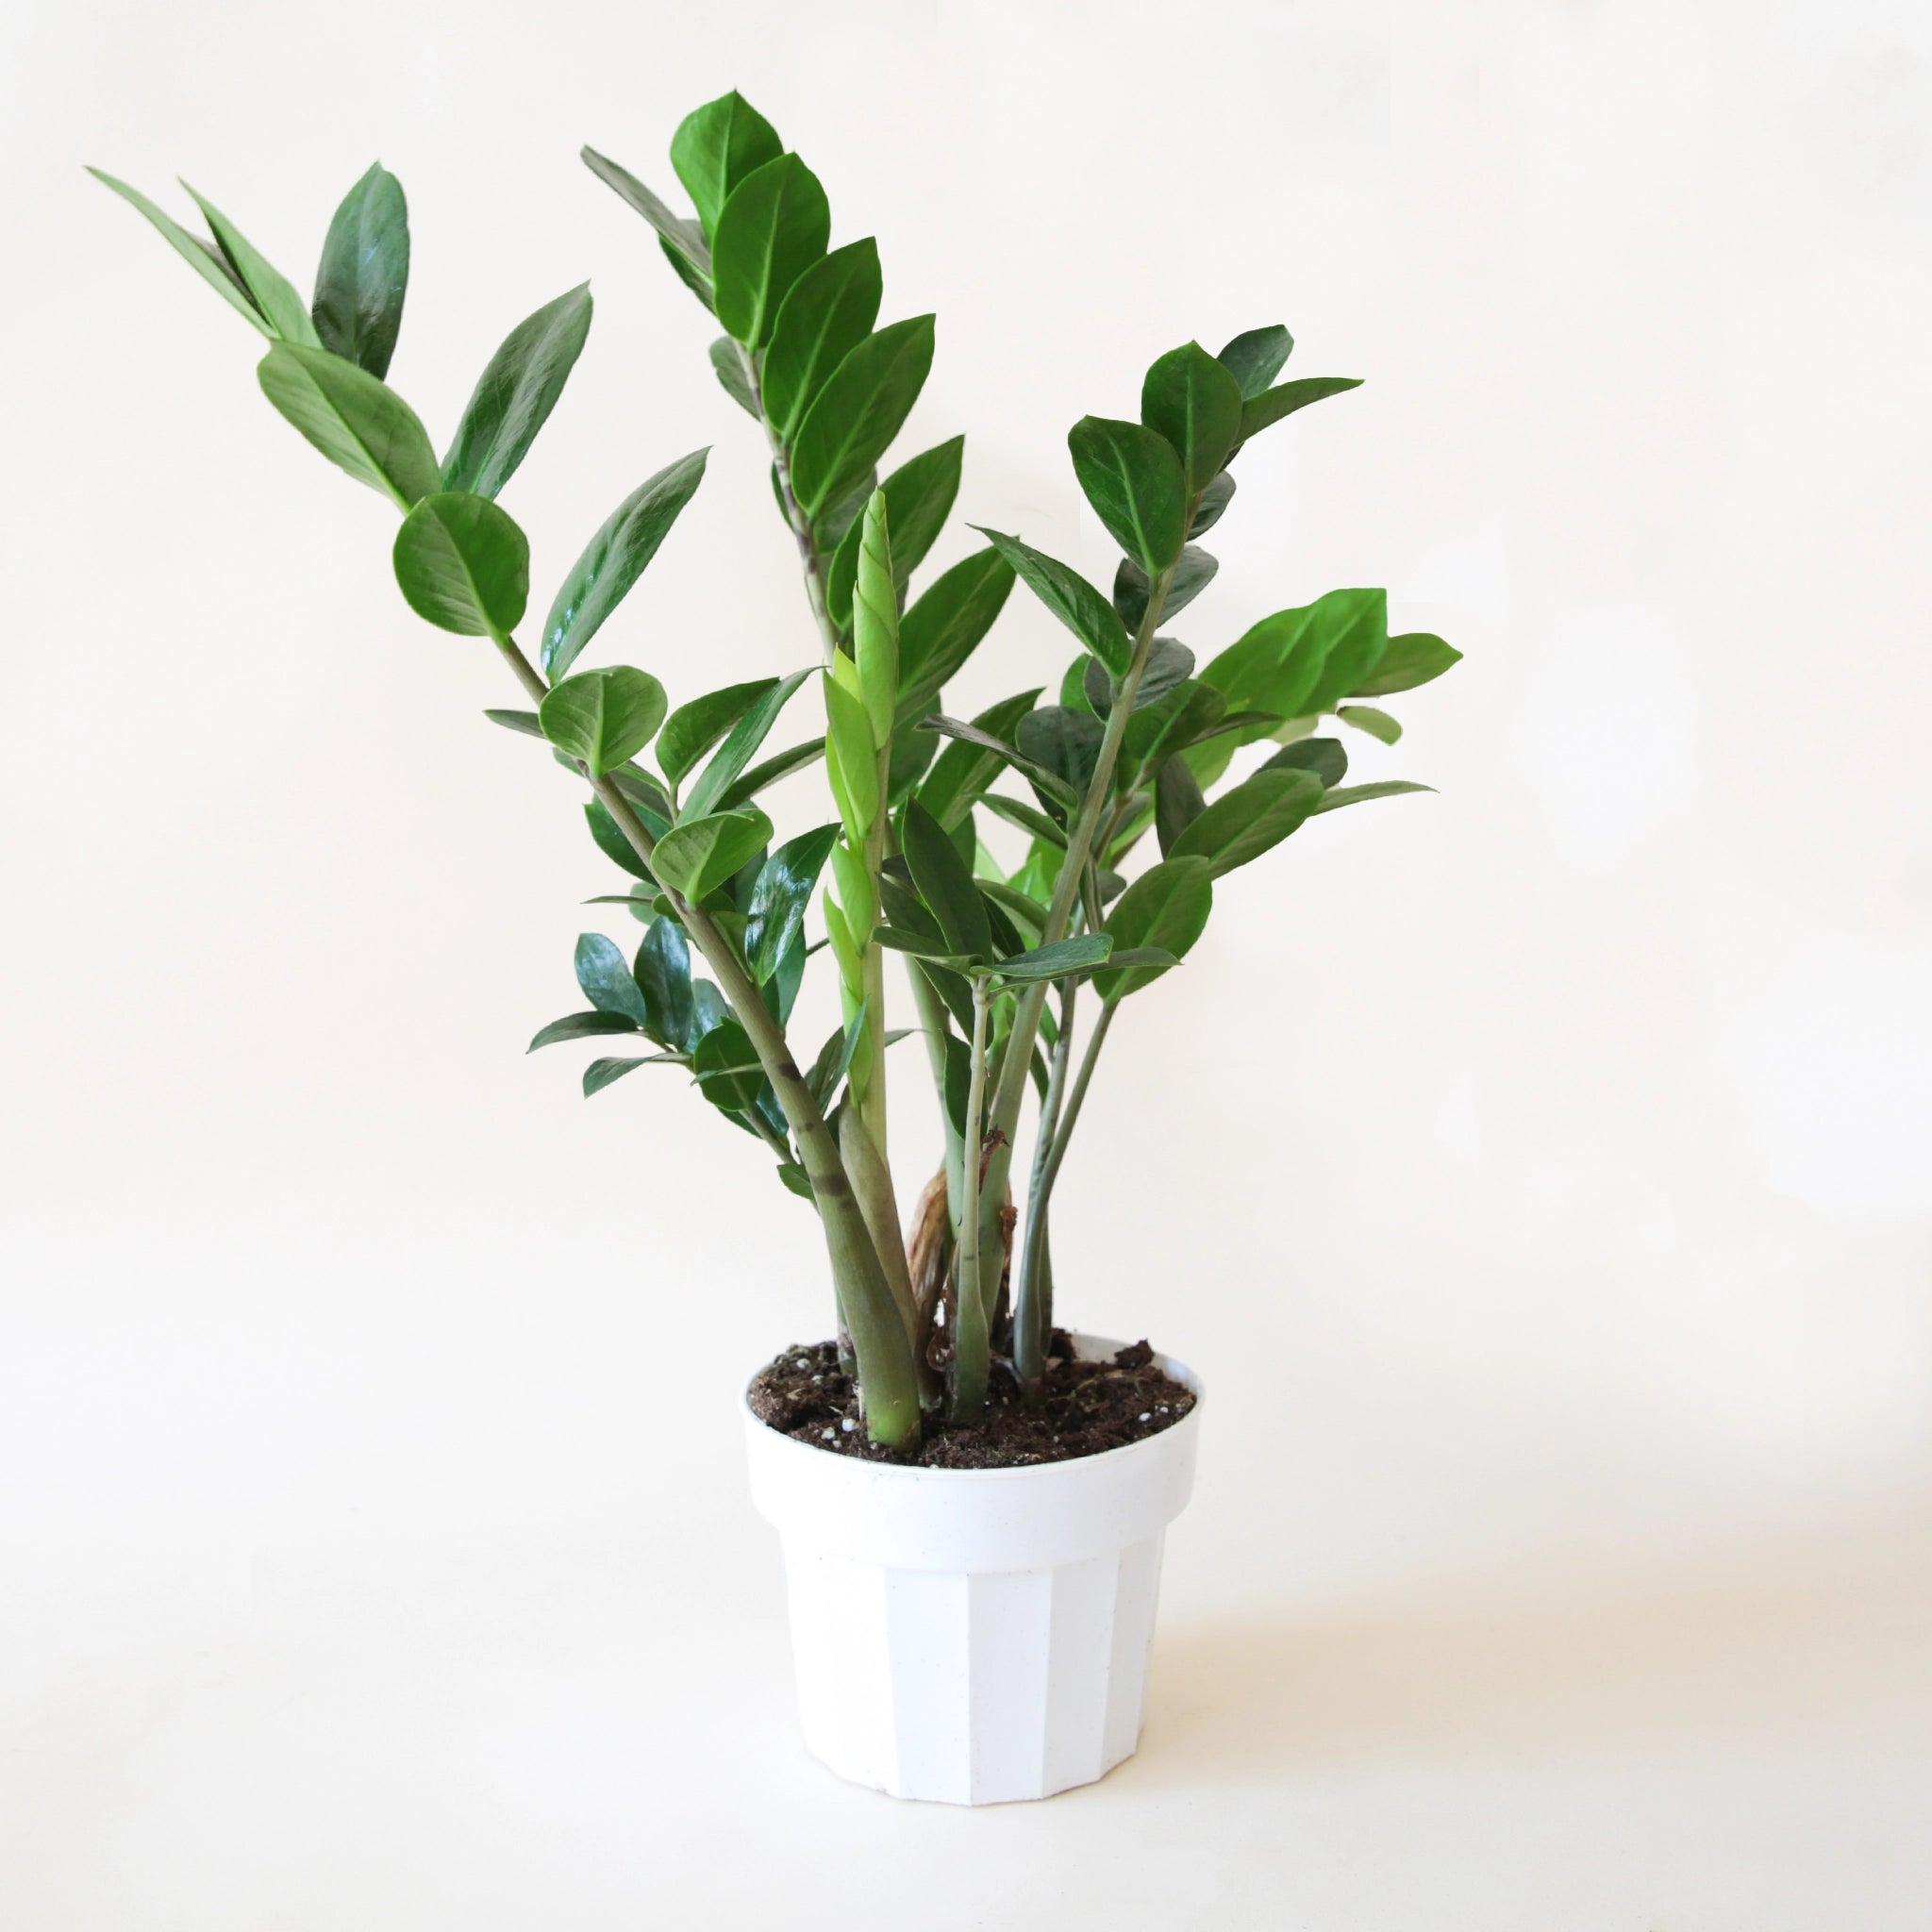 a zz plant with tall stems covered in small pointed leaves sits in a white pot